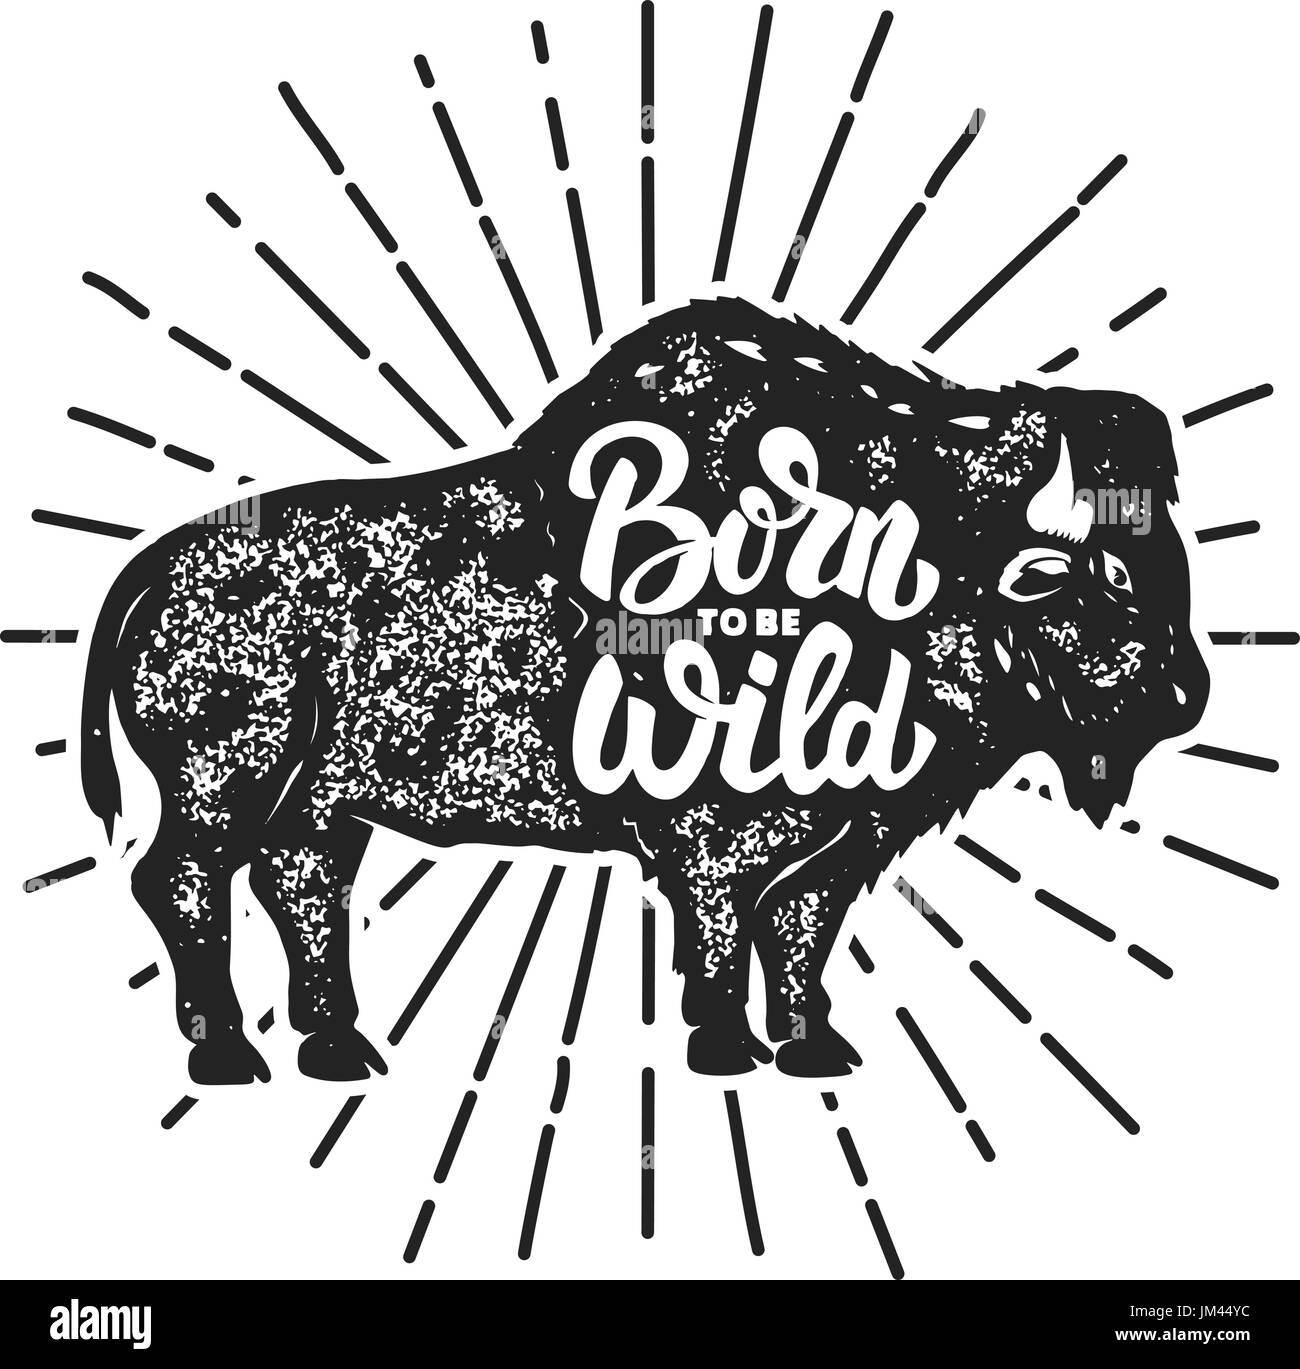 Born to be wild. Grunge style bison silhouette isolated on white background. Design elements for logo, label, emblem, sign. Vector illustration. Stock Vector